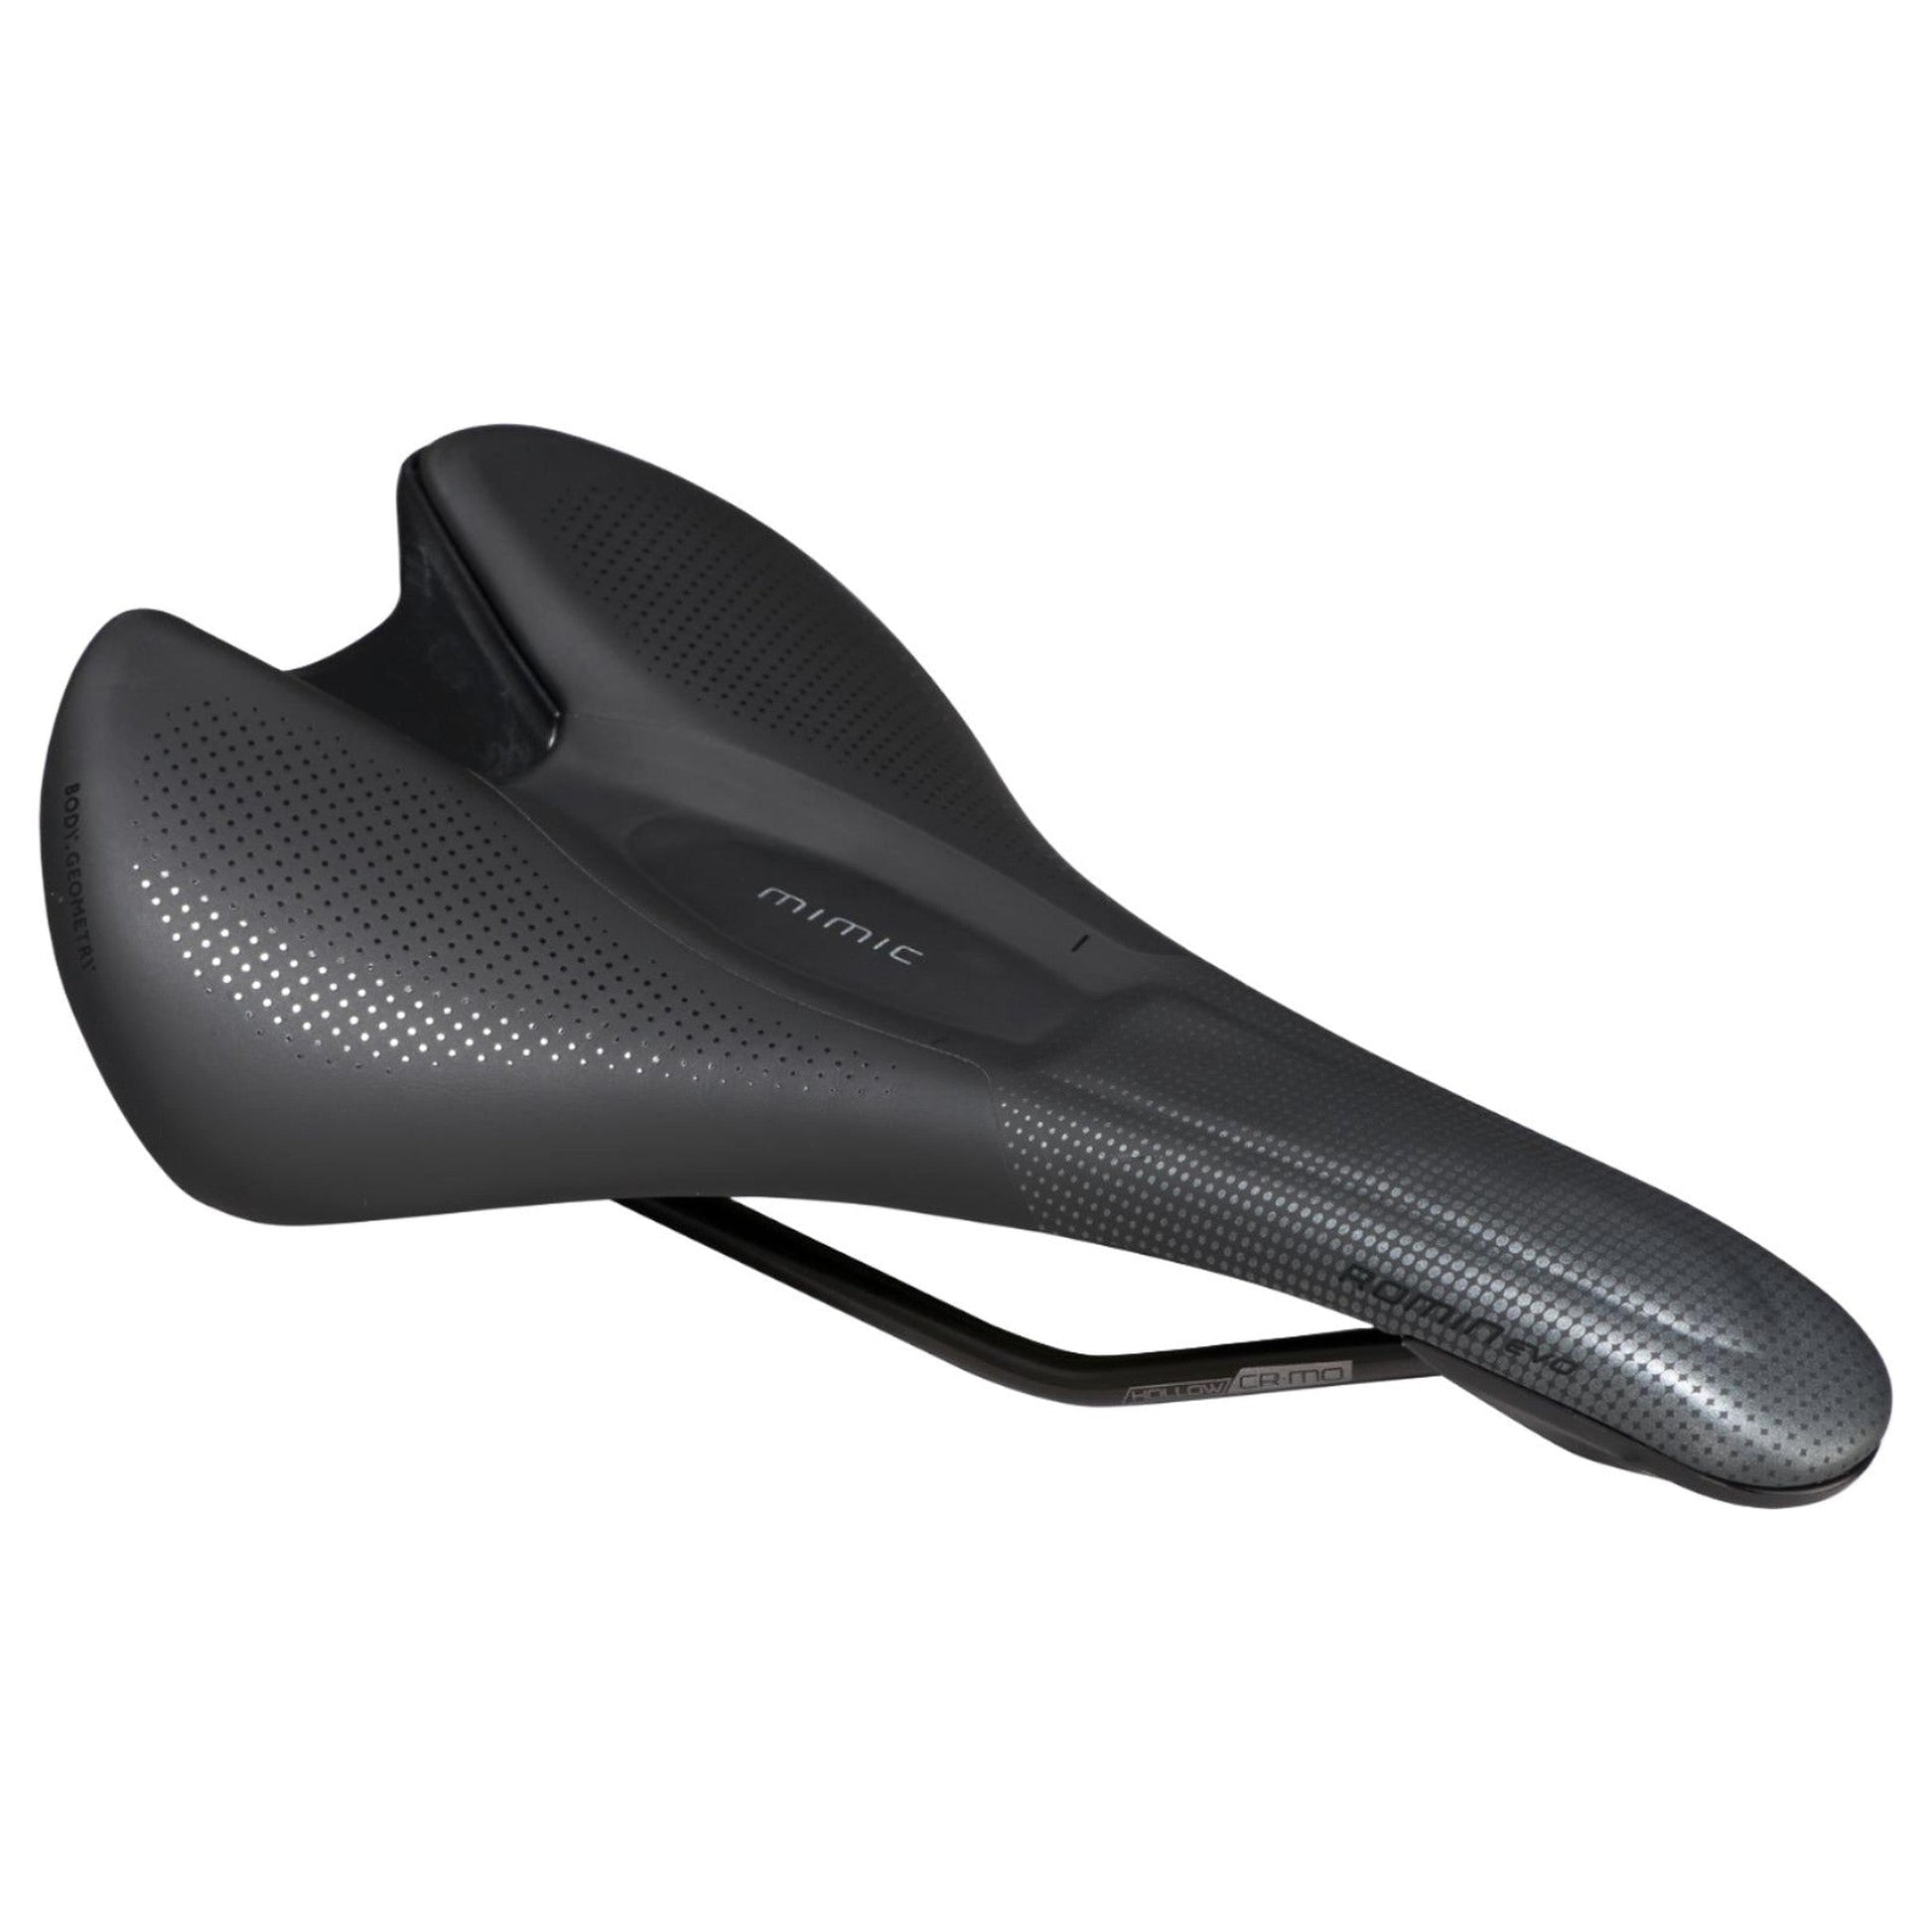 Romin EVO Comp Saddle with MIMIC | Complete Cyclist - For as long as there've been saddles, women have been having issues with them. But where some see unsolvable problems, we see practical solutions. With our patented design, MIMIC technology helps create a saddle that perfectly adapts to your body to give you the support you need.